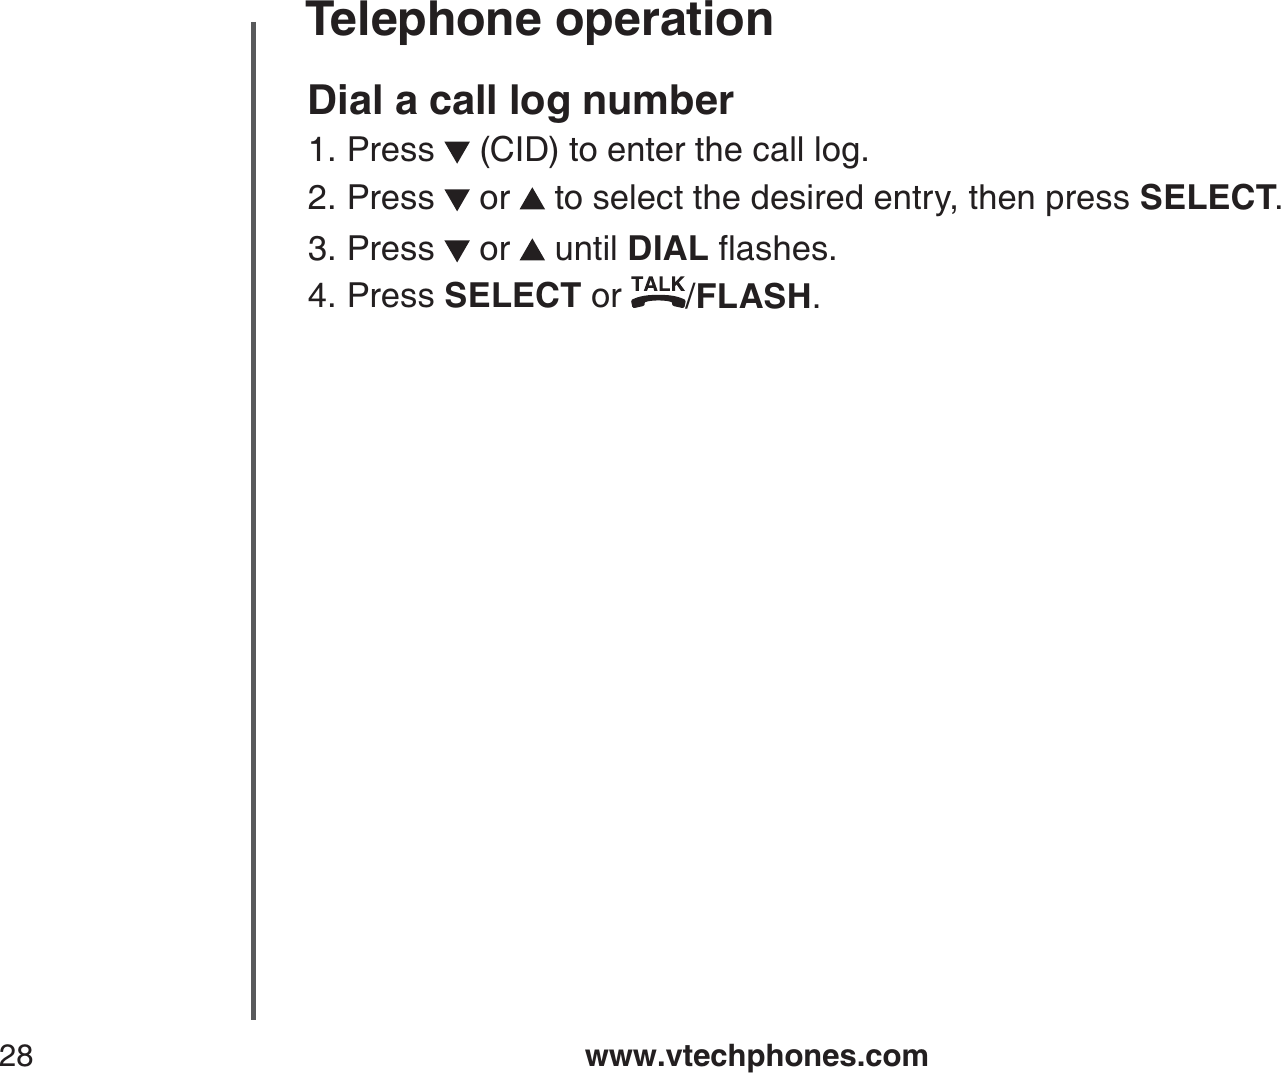 www.vtechphones.com28Telephone operationDial a call log numberPress   (CID) to enter the call log. Press   or   to select the desired entry, then press SELECT.Press   or   until DIALƀCUJGUPress SELECT or  /FLASH.1.2.3.4.